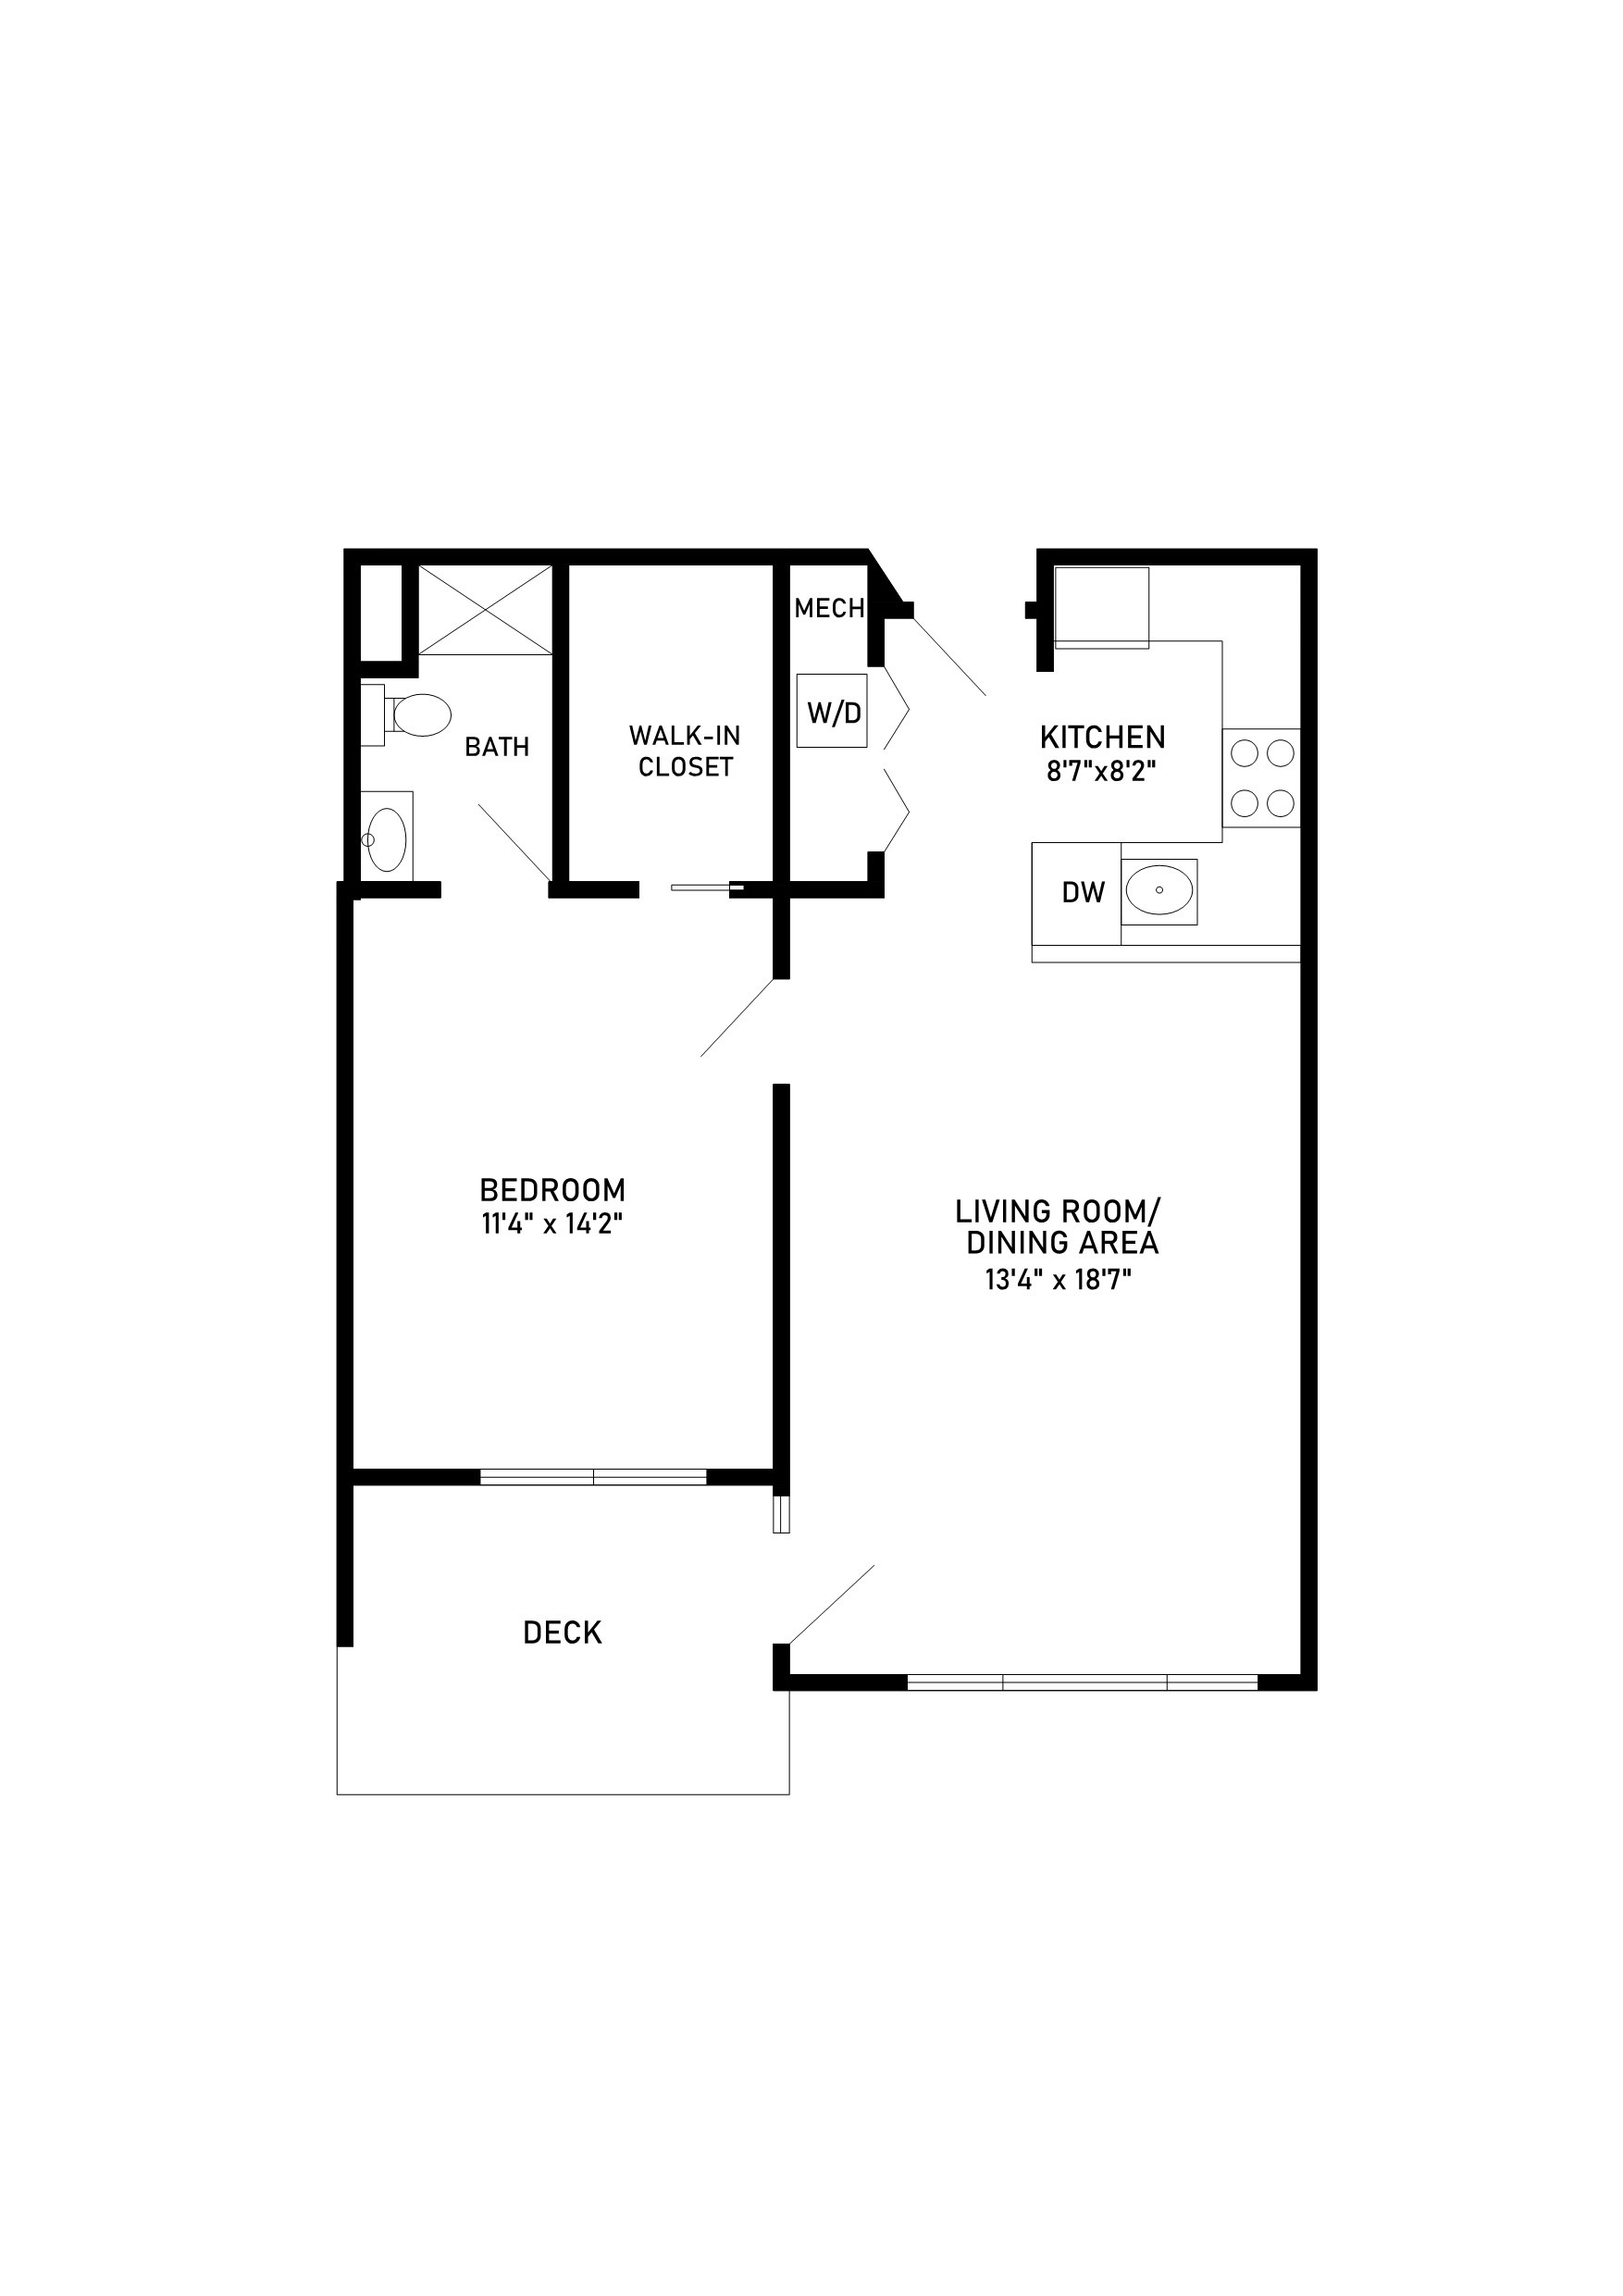 Thumbnail image of 1 bedroom apartment 654 square feet